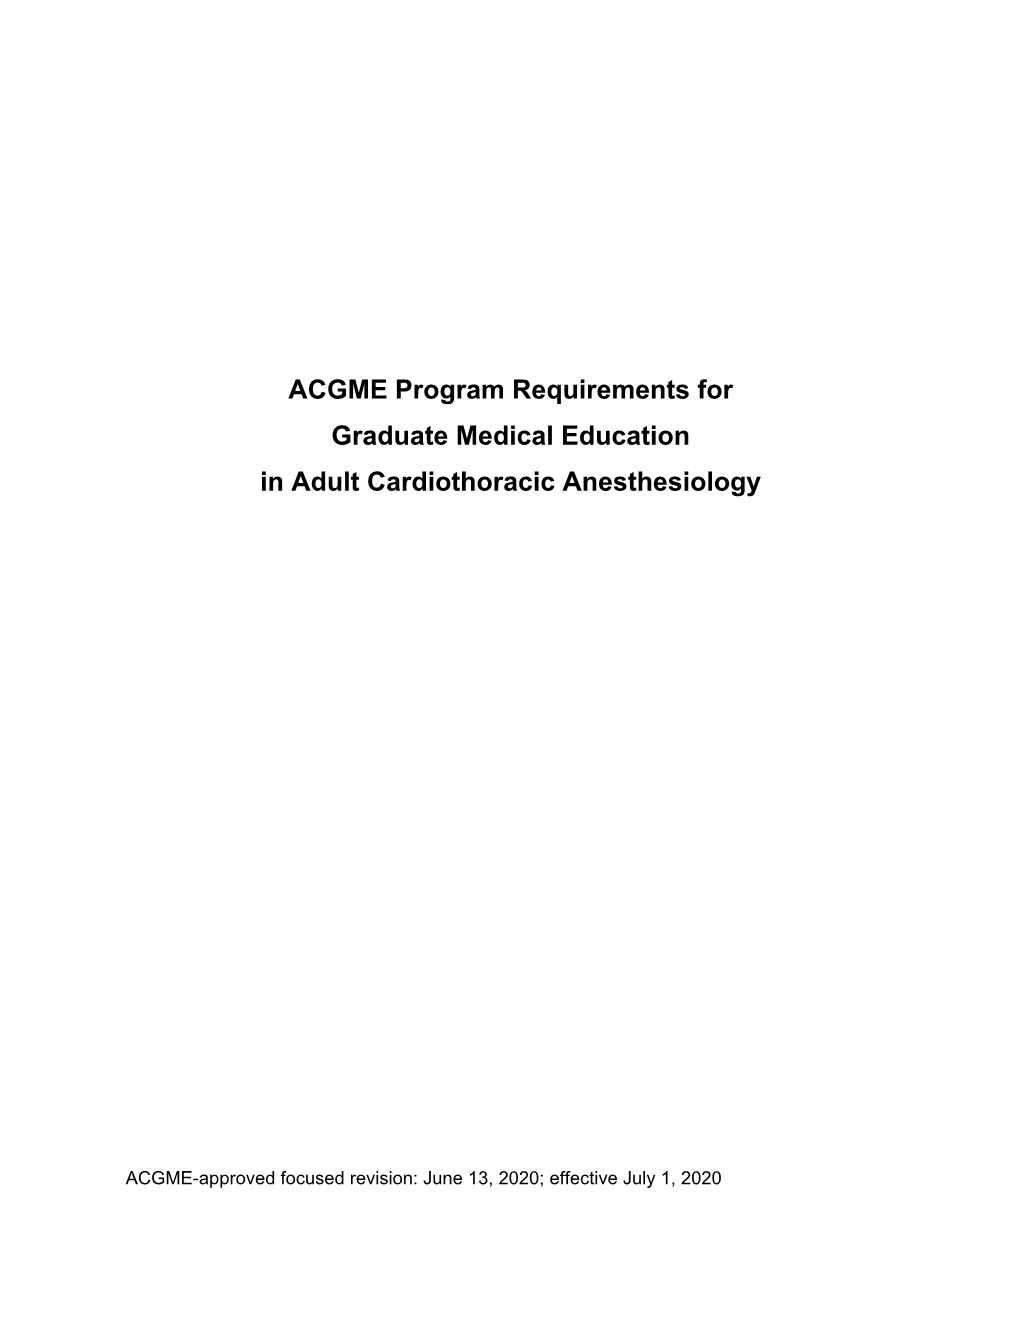 7/1/2020 Adult Cardiothoracic Anesthesiology